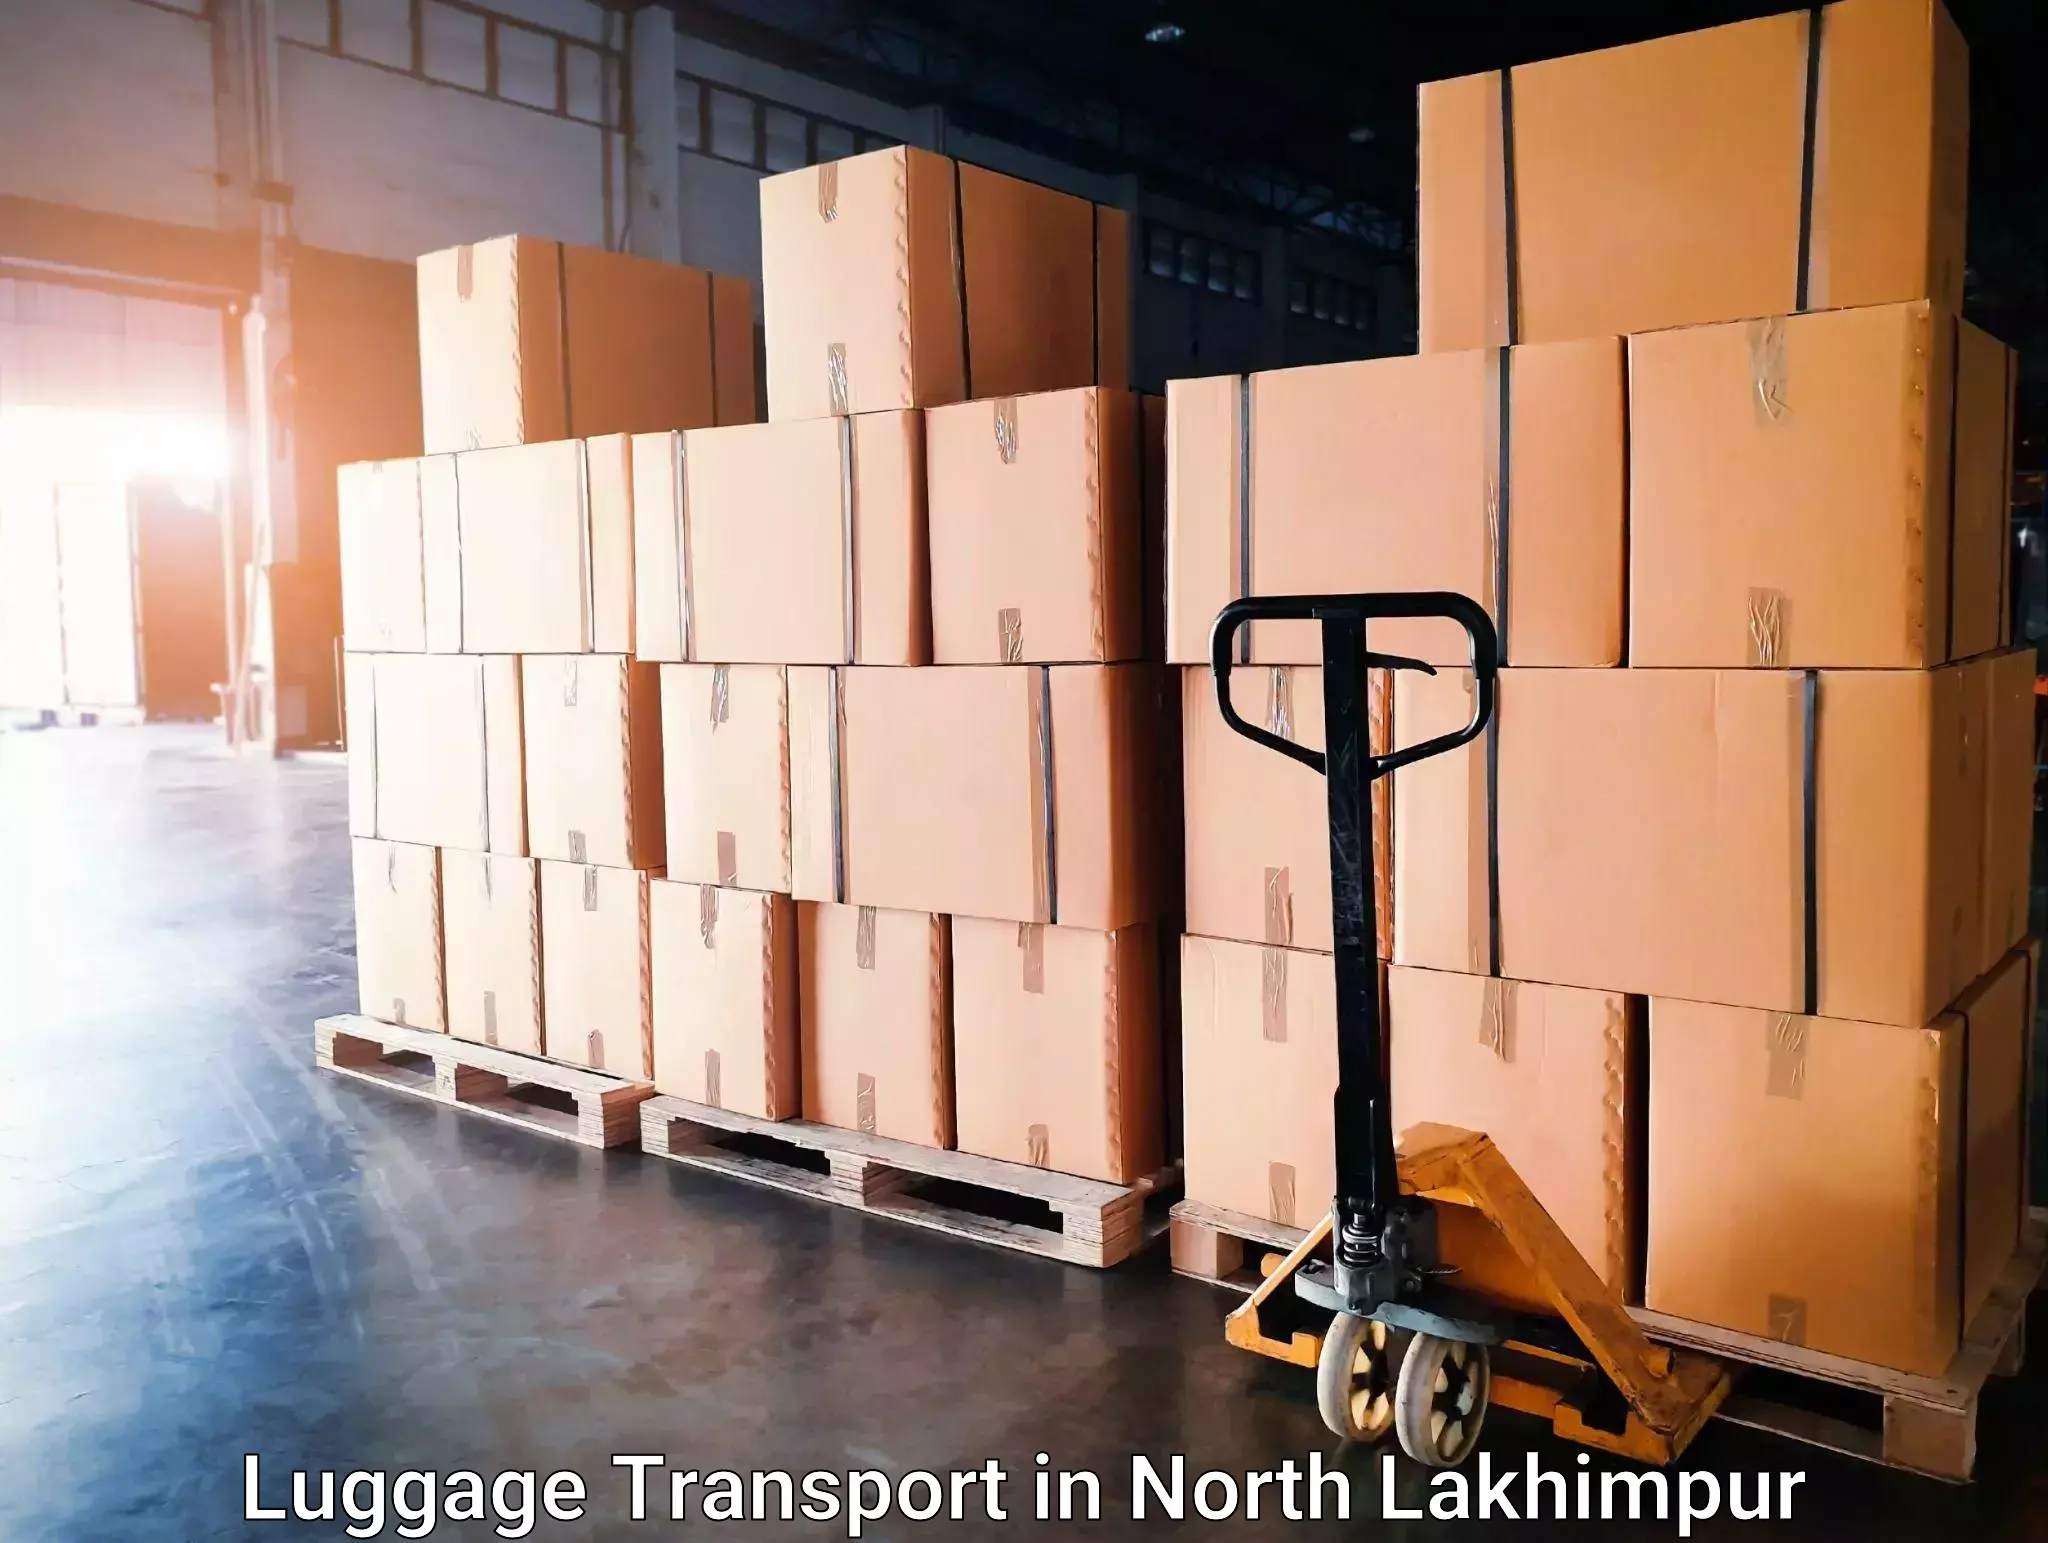 Luggage delivery system in North Lakhimpur